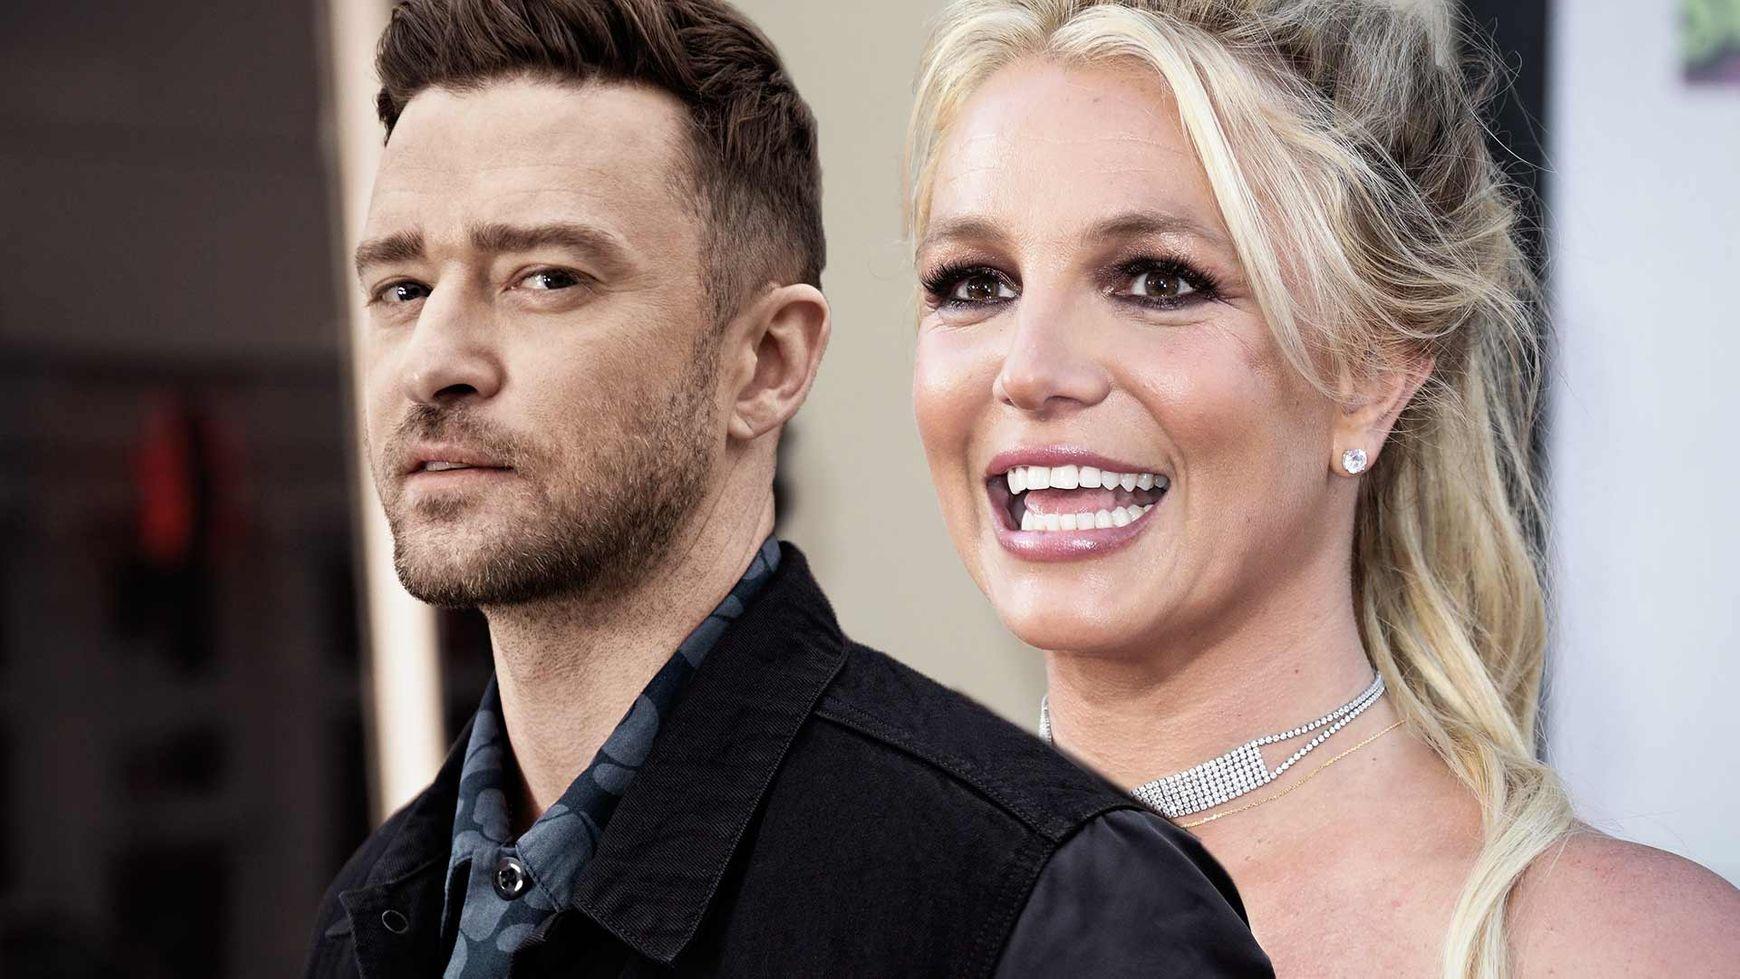 Justin Timberlake Flexes His Muscles After Britney Spears Shout Out The Blast 4768